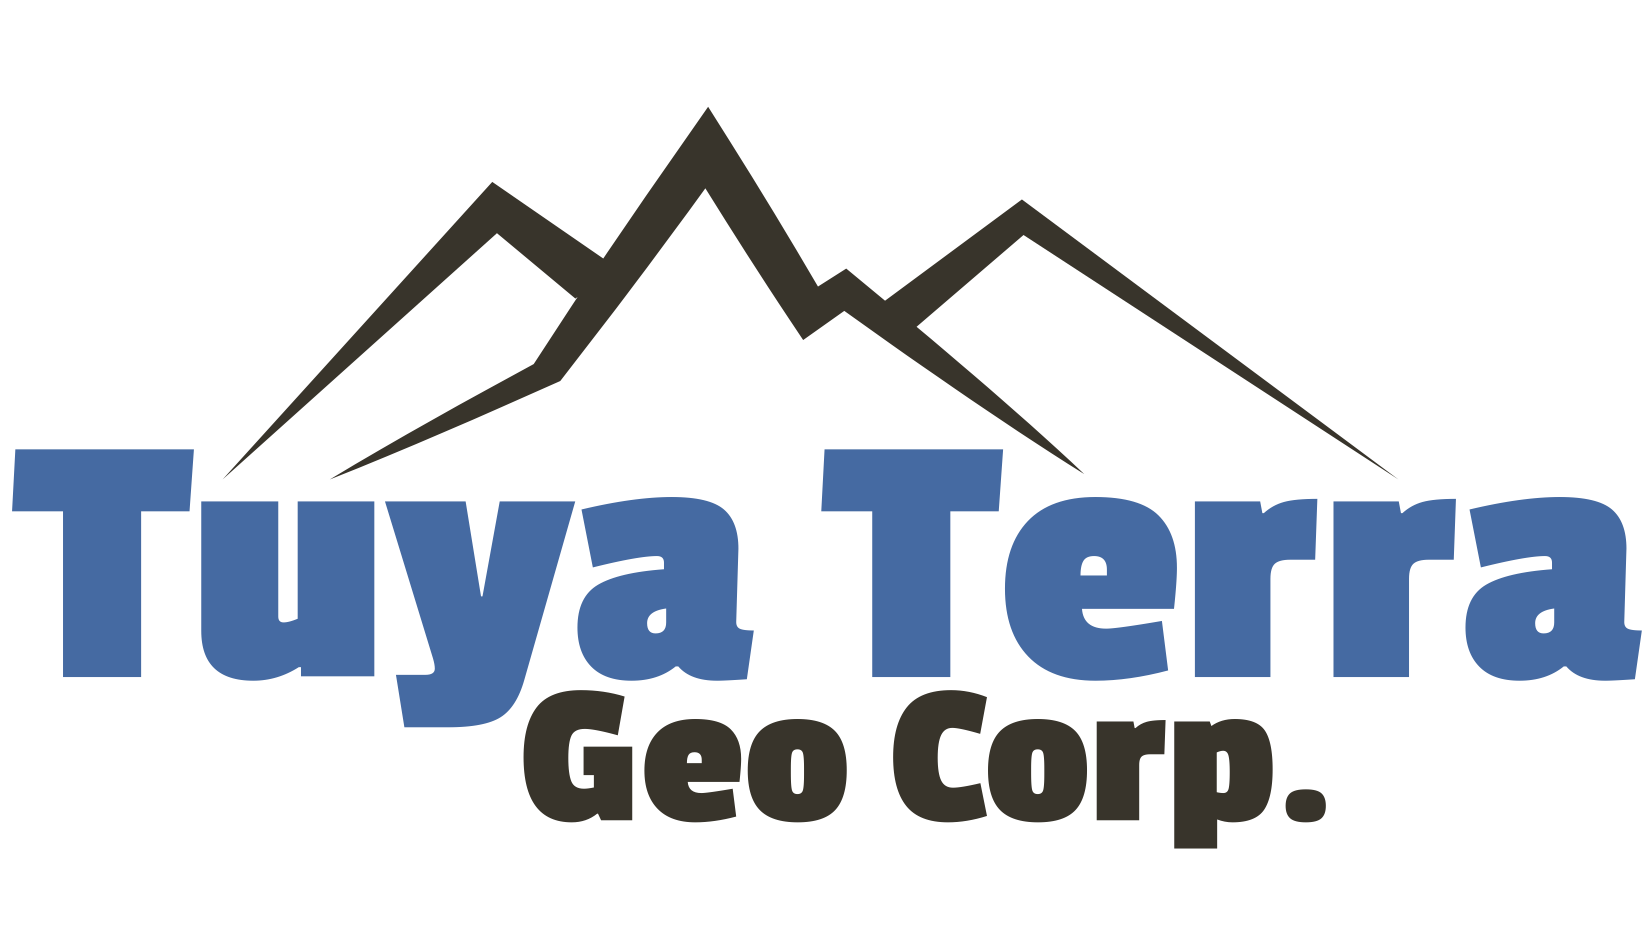  Tuya Terra Geo Corp. (TTGeo) provides consulting services to a variety of clients ranging from technical and management support in geothermal energy, lithium exploration, project management, community consultation, stakeholder engagement and geoscie